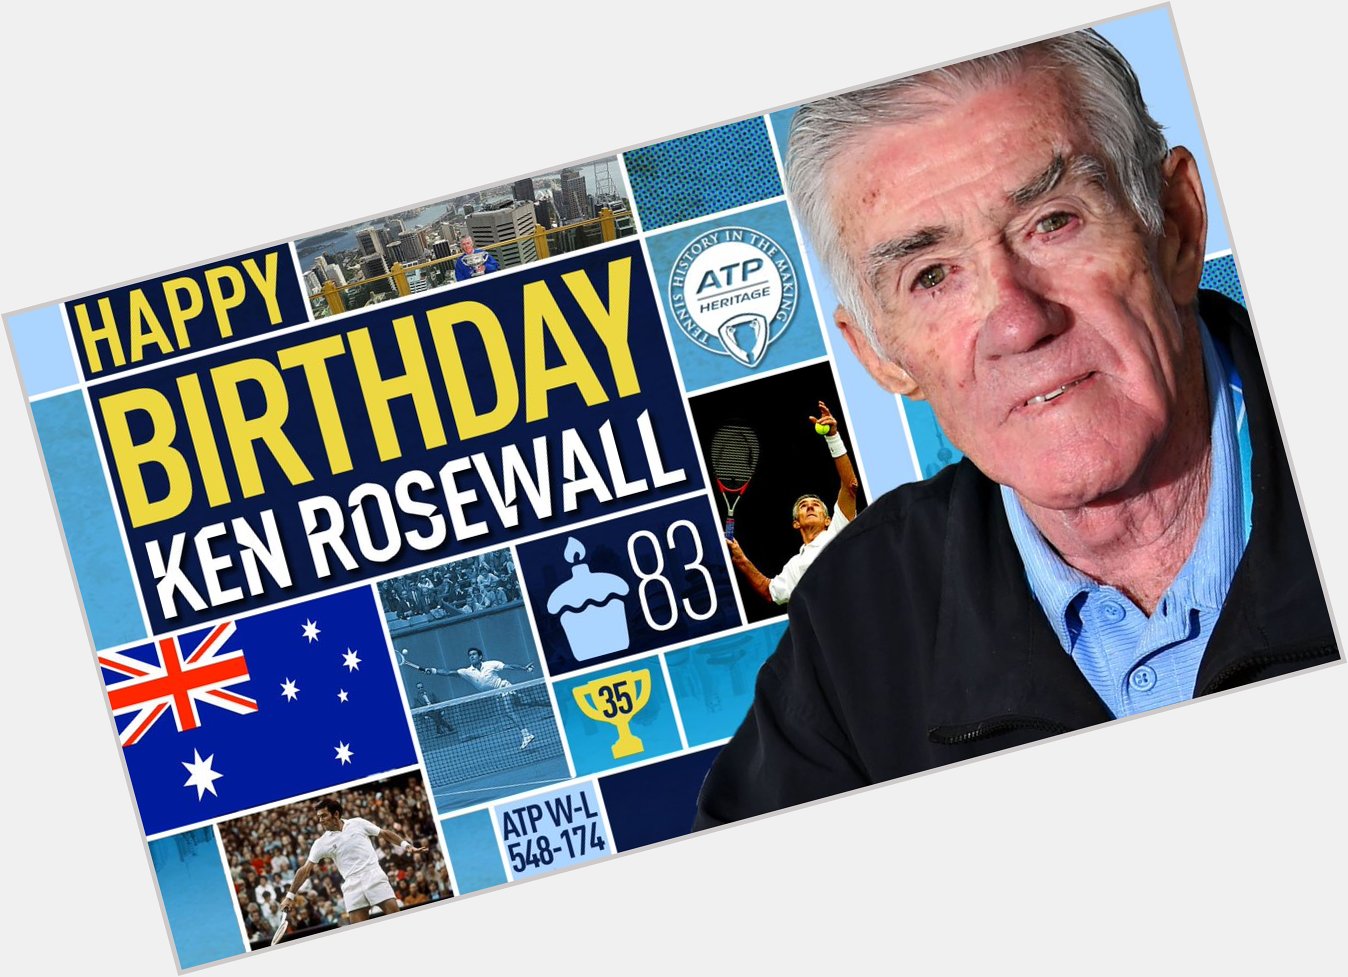 Happy Birthday to  legend, Ken Rosewall! The Aussie turns 8 3 today Profile  